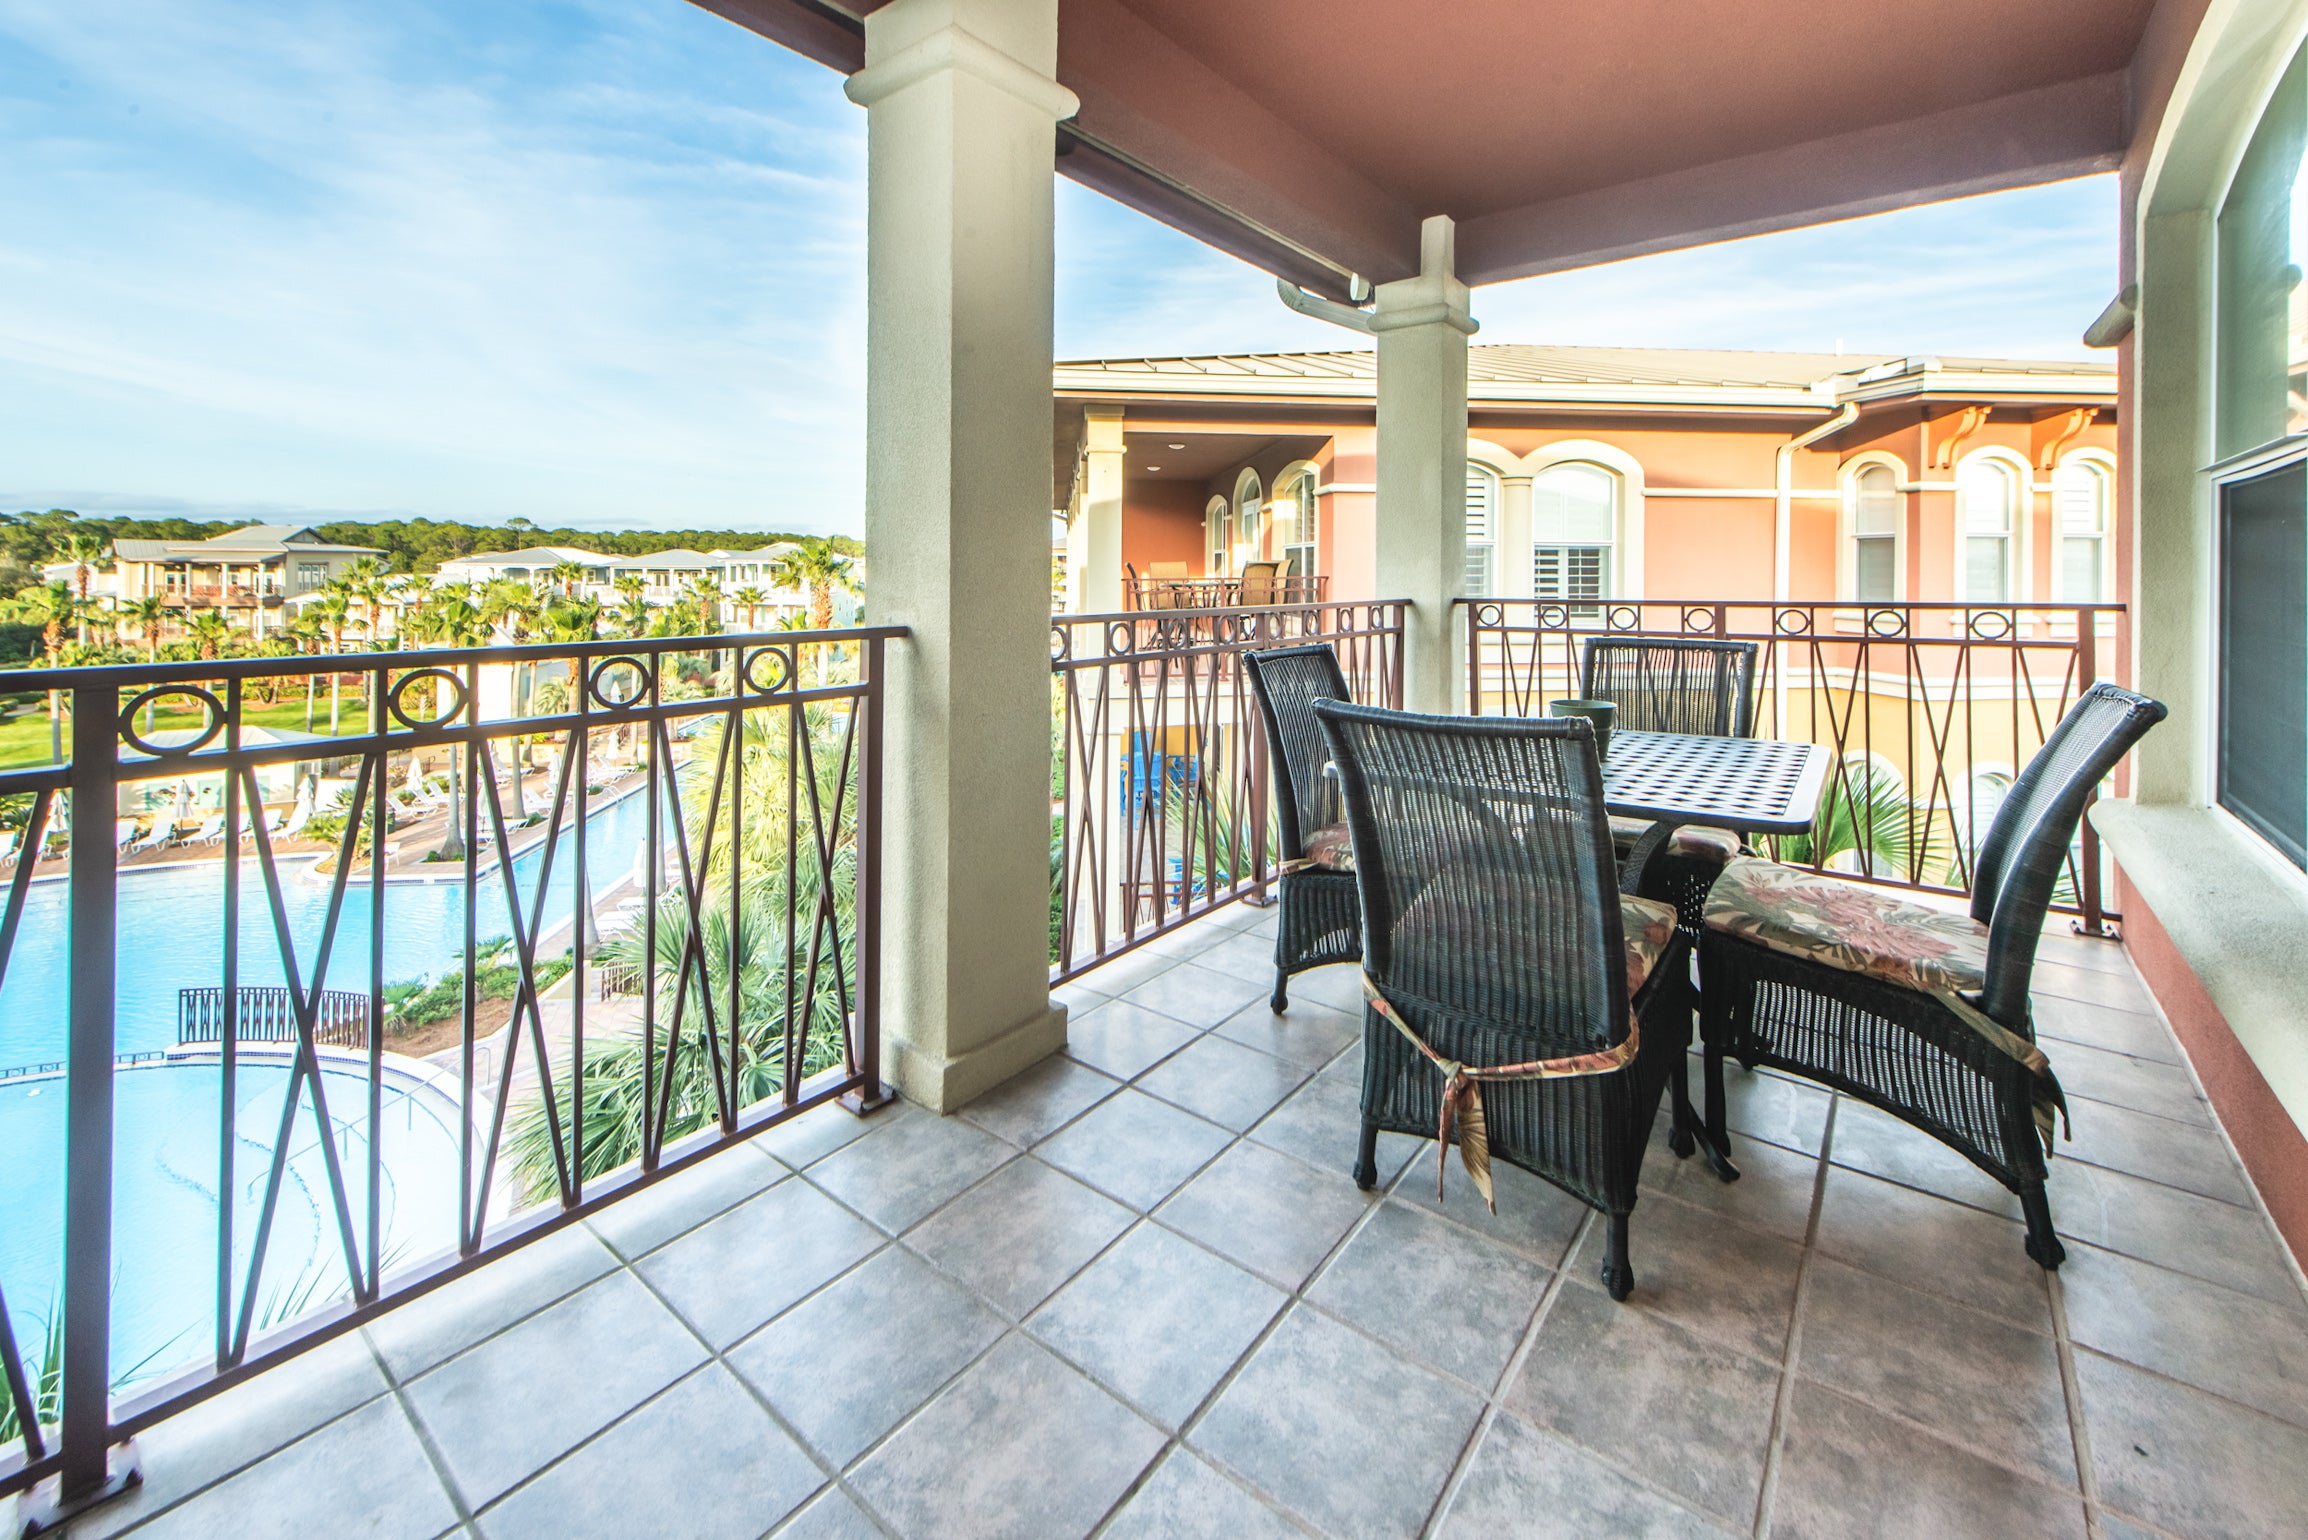 Dine on this Spacious, Tiled Balcony